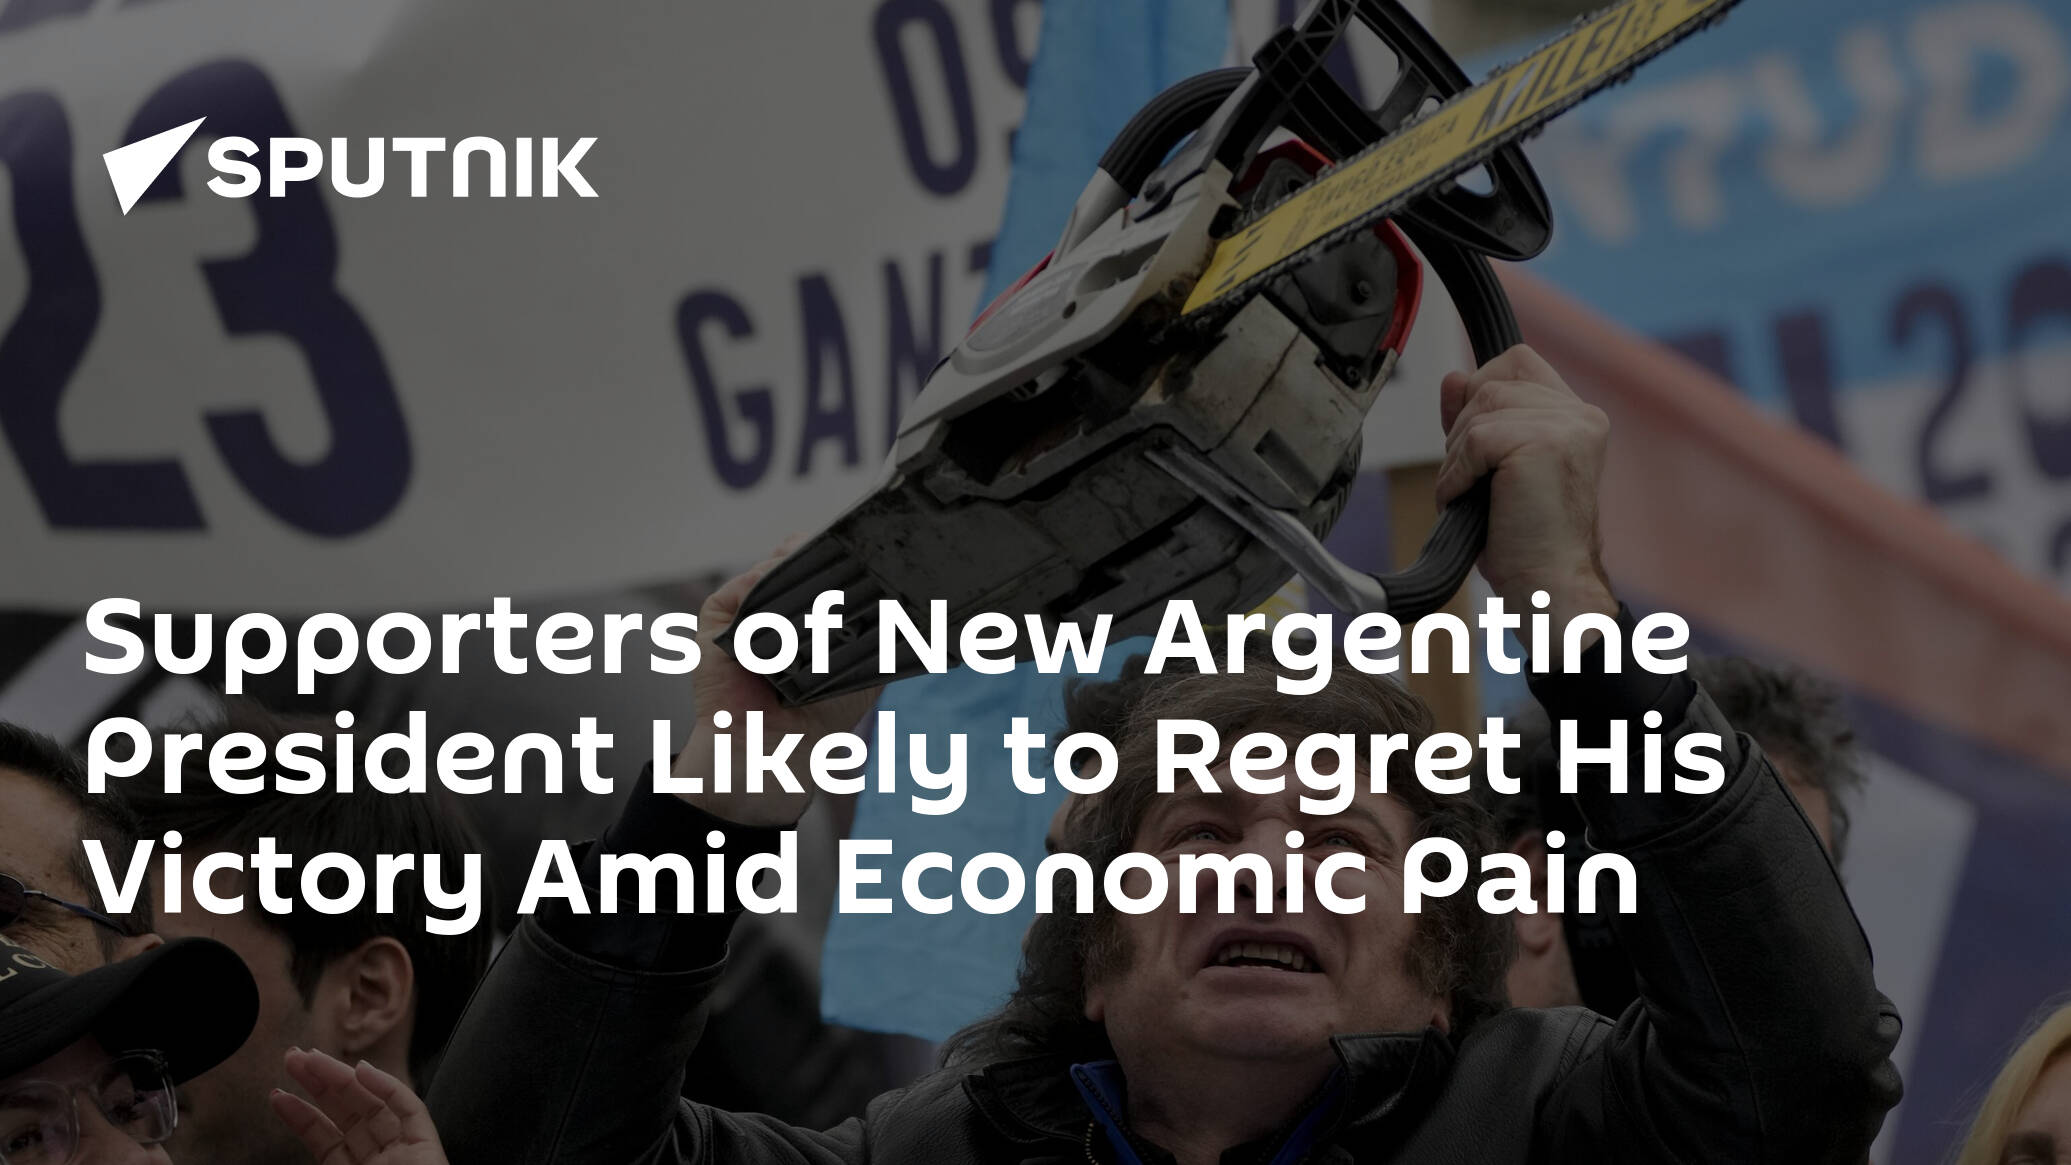 Supporters of New Argentine President Likely to Regret His Victory Amid Economic Pain